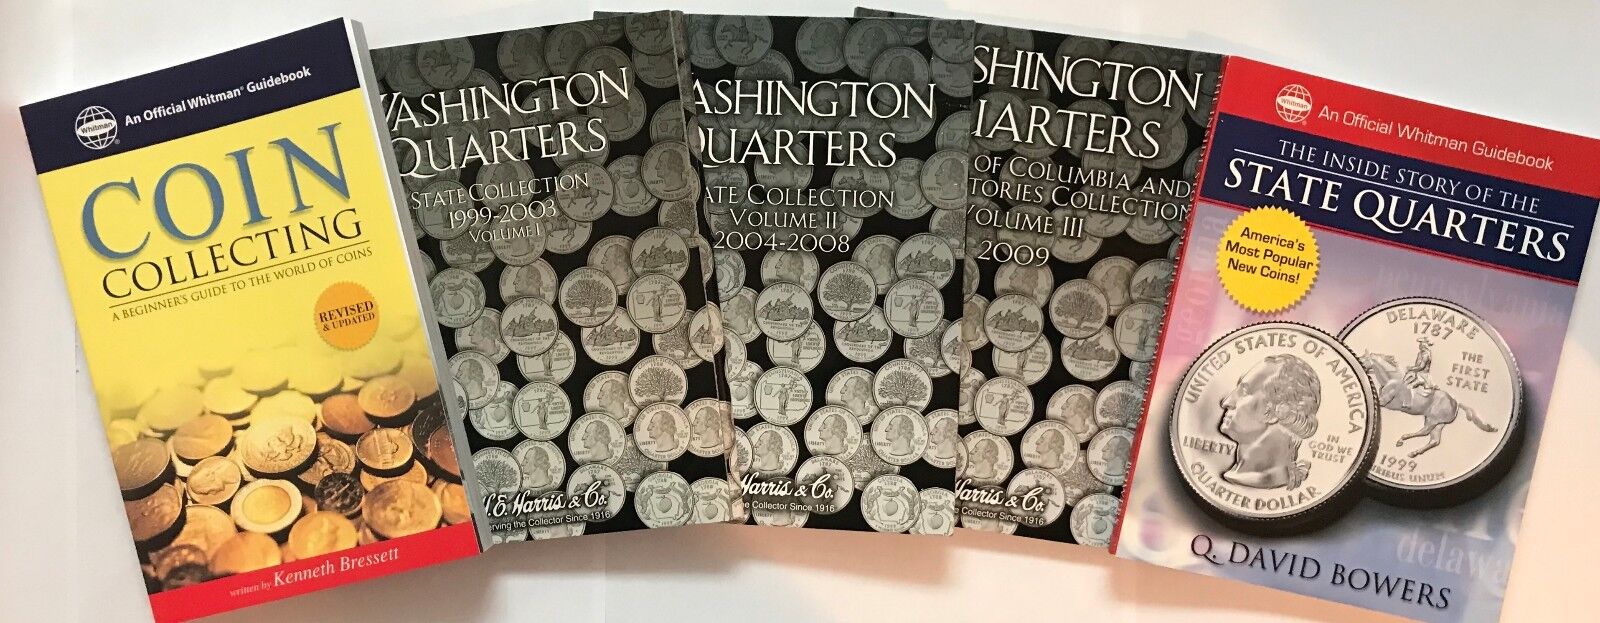 P & D QUARTERS (1999-2009) 3 FOLDERS & COIN COLLECTING GUIDE & STORY BOOK   Whitman